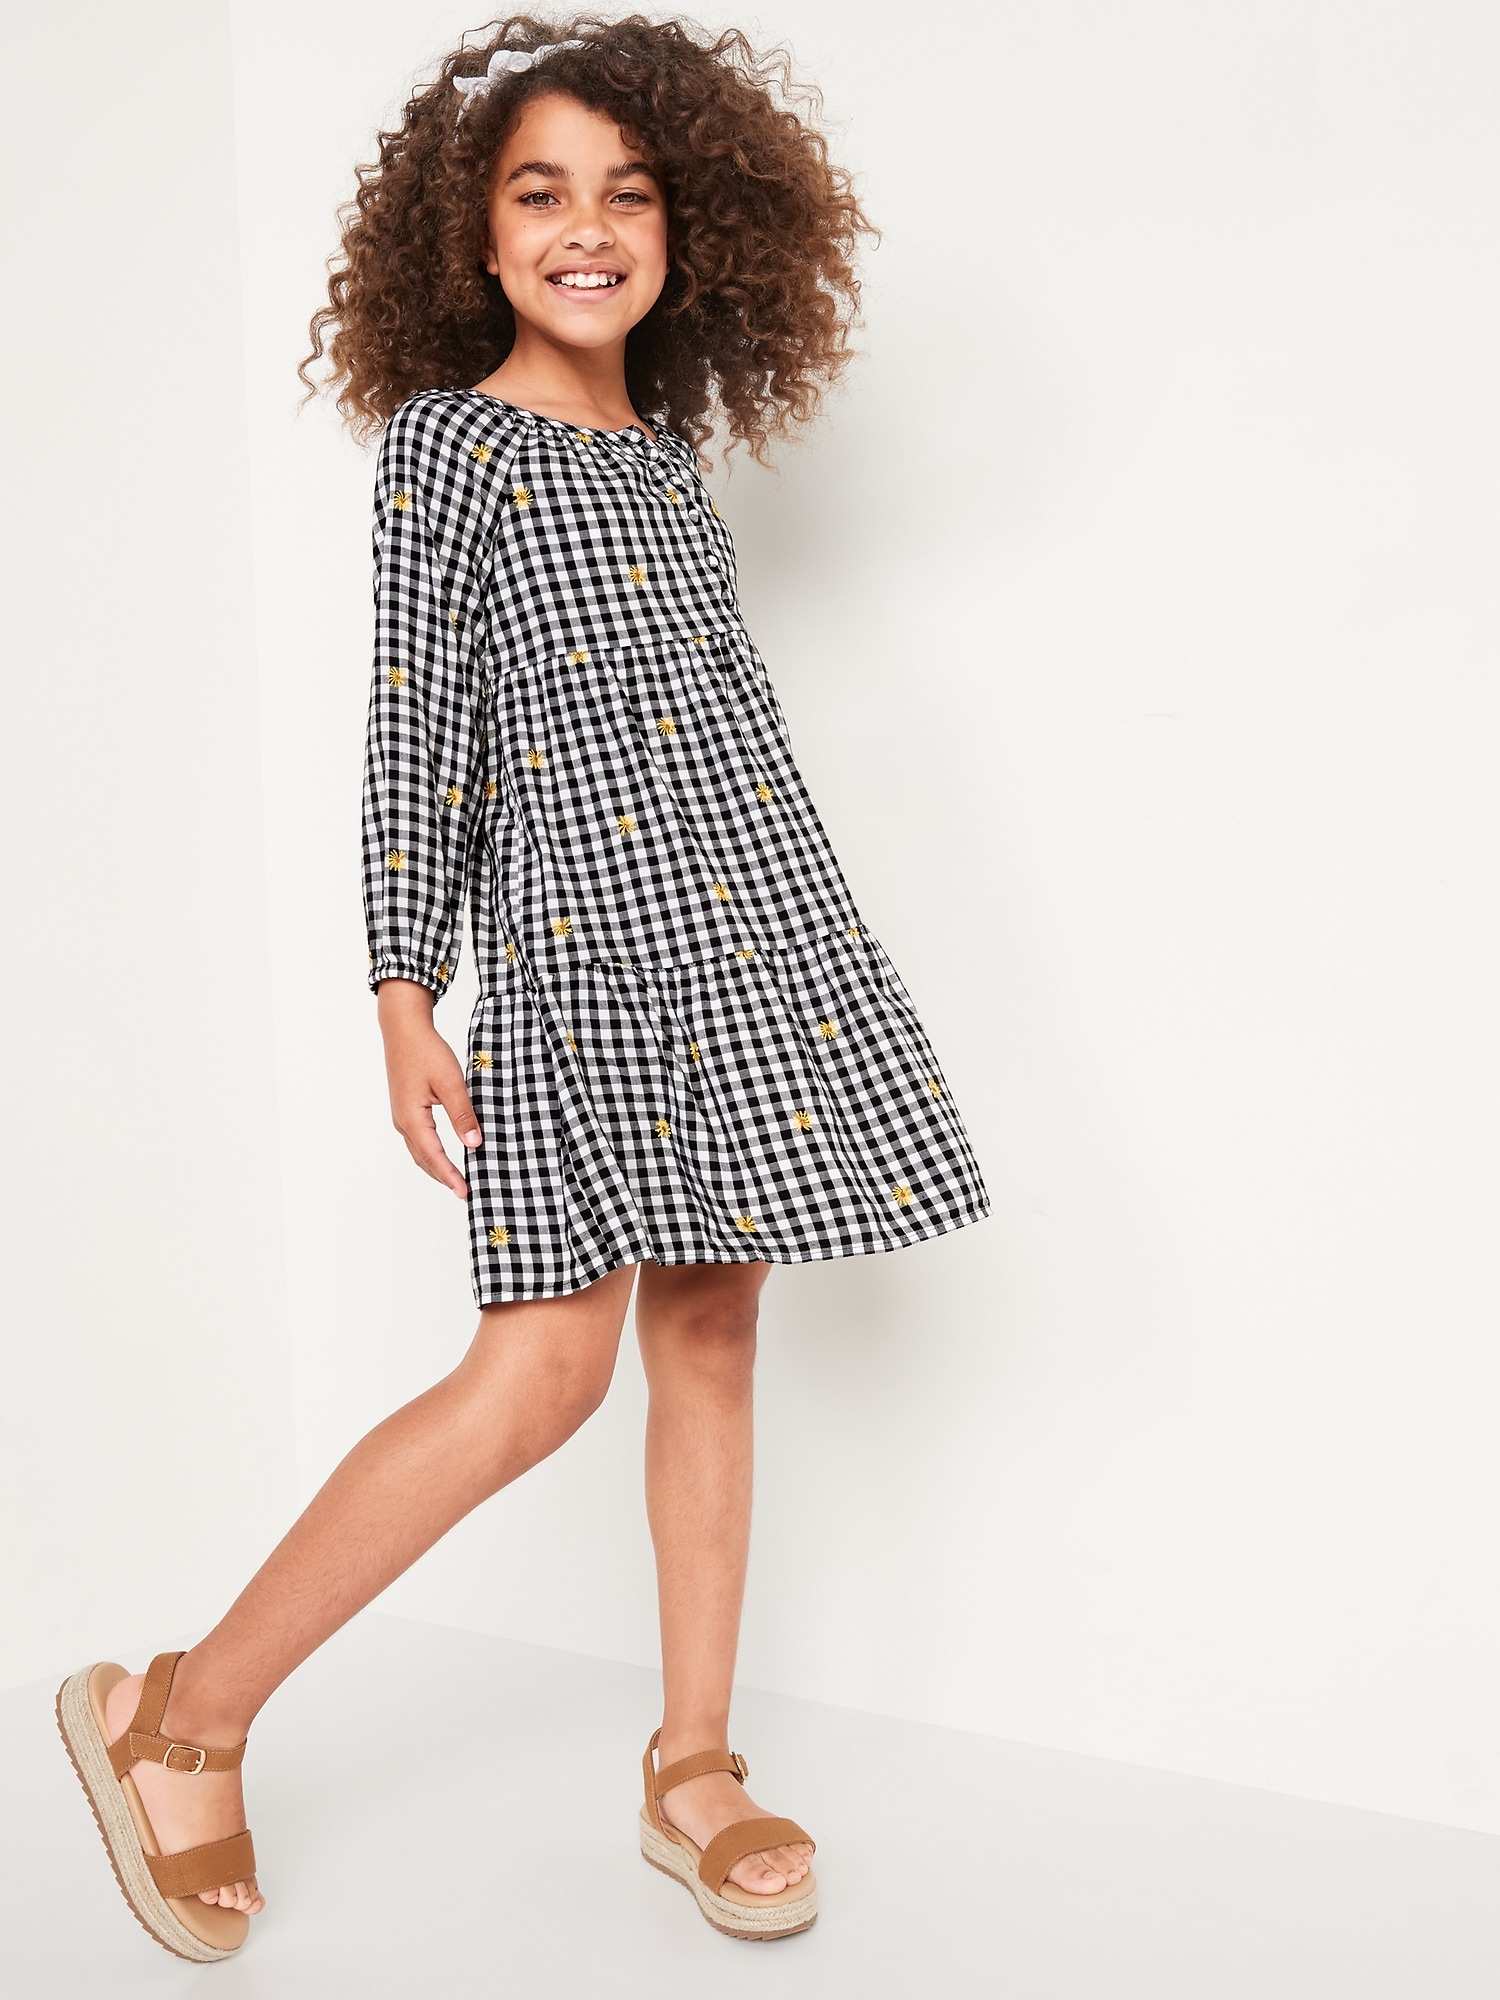 Oldnavy Tiered Printed Long-Sleeve Button-Front All-Day Dress for Girls